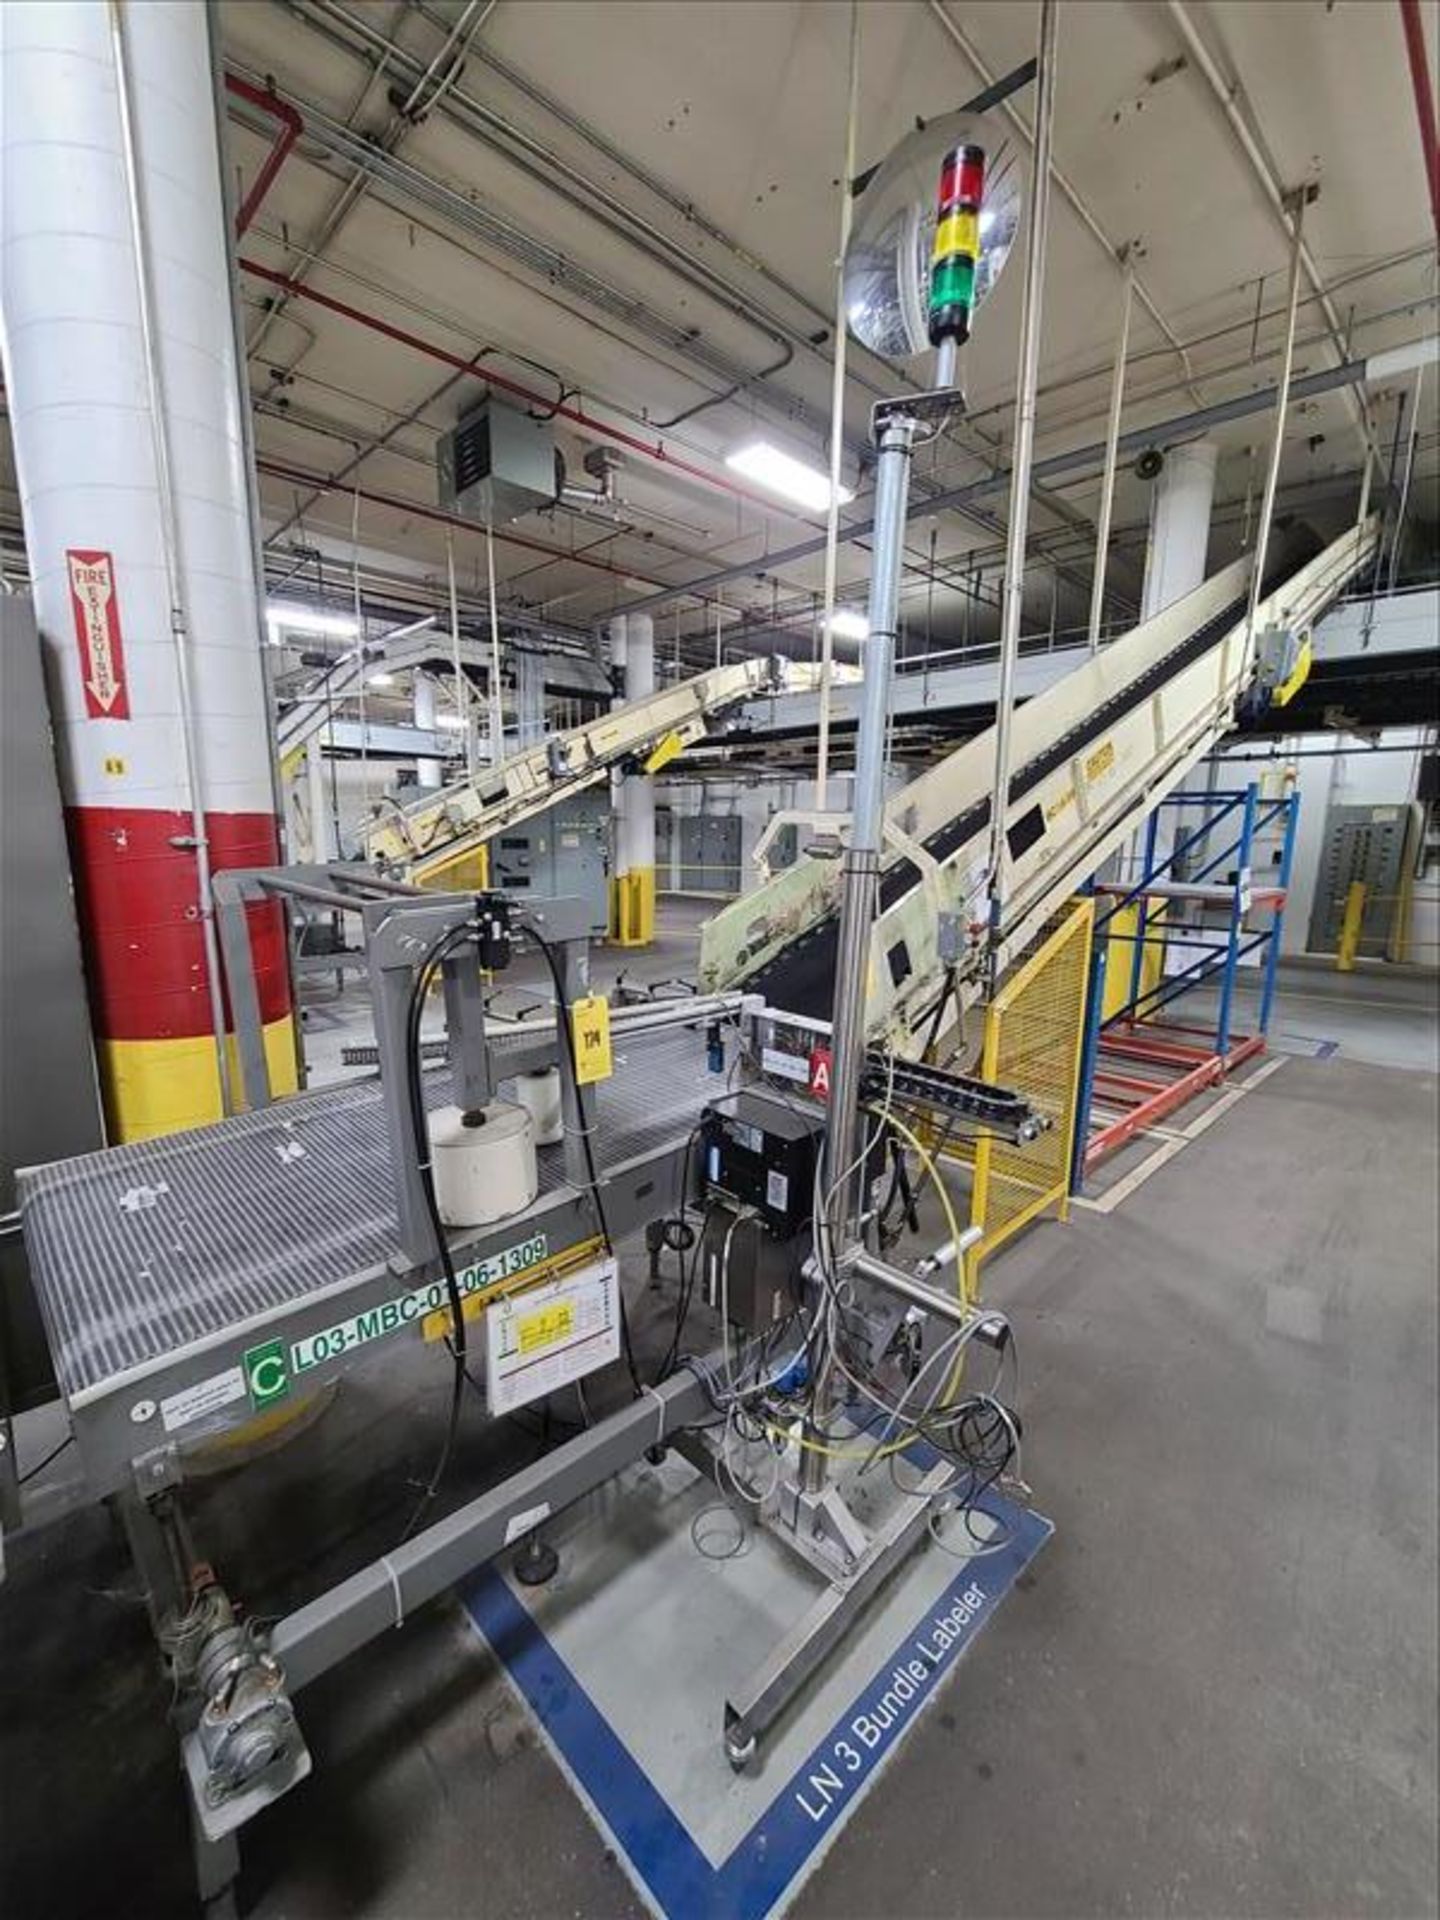 NATO labeler, model 8460 SE, s/n 60801, with incline conveyor, 67"l x 34"w [Packaging Line 3]